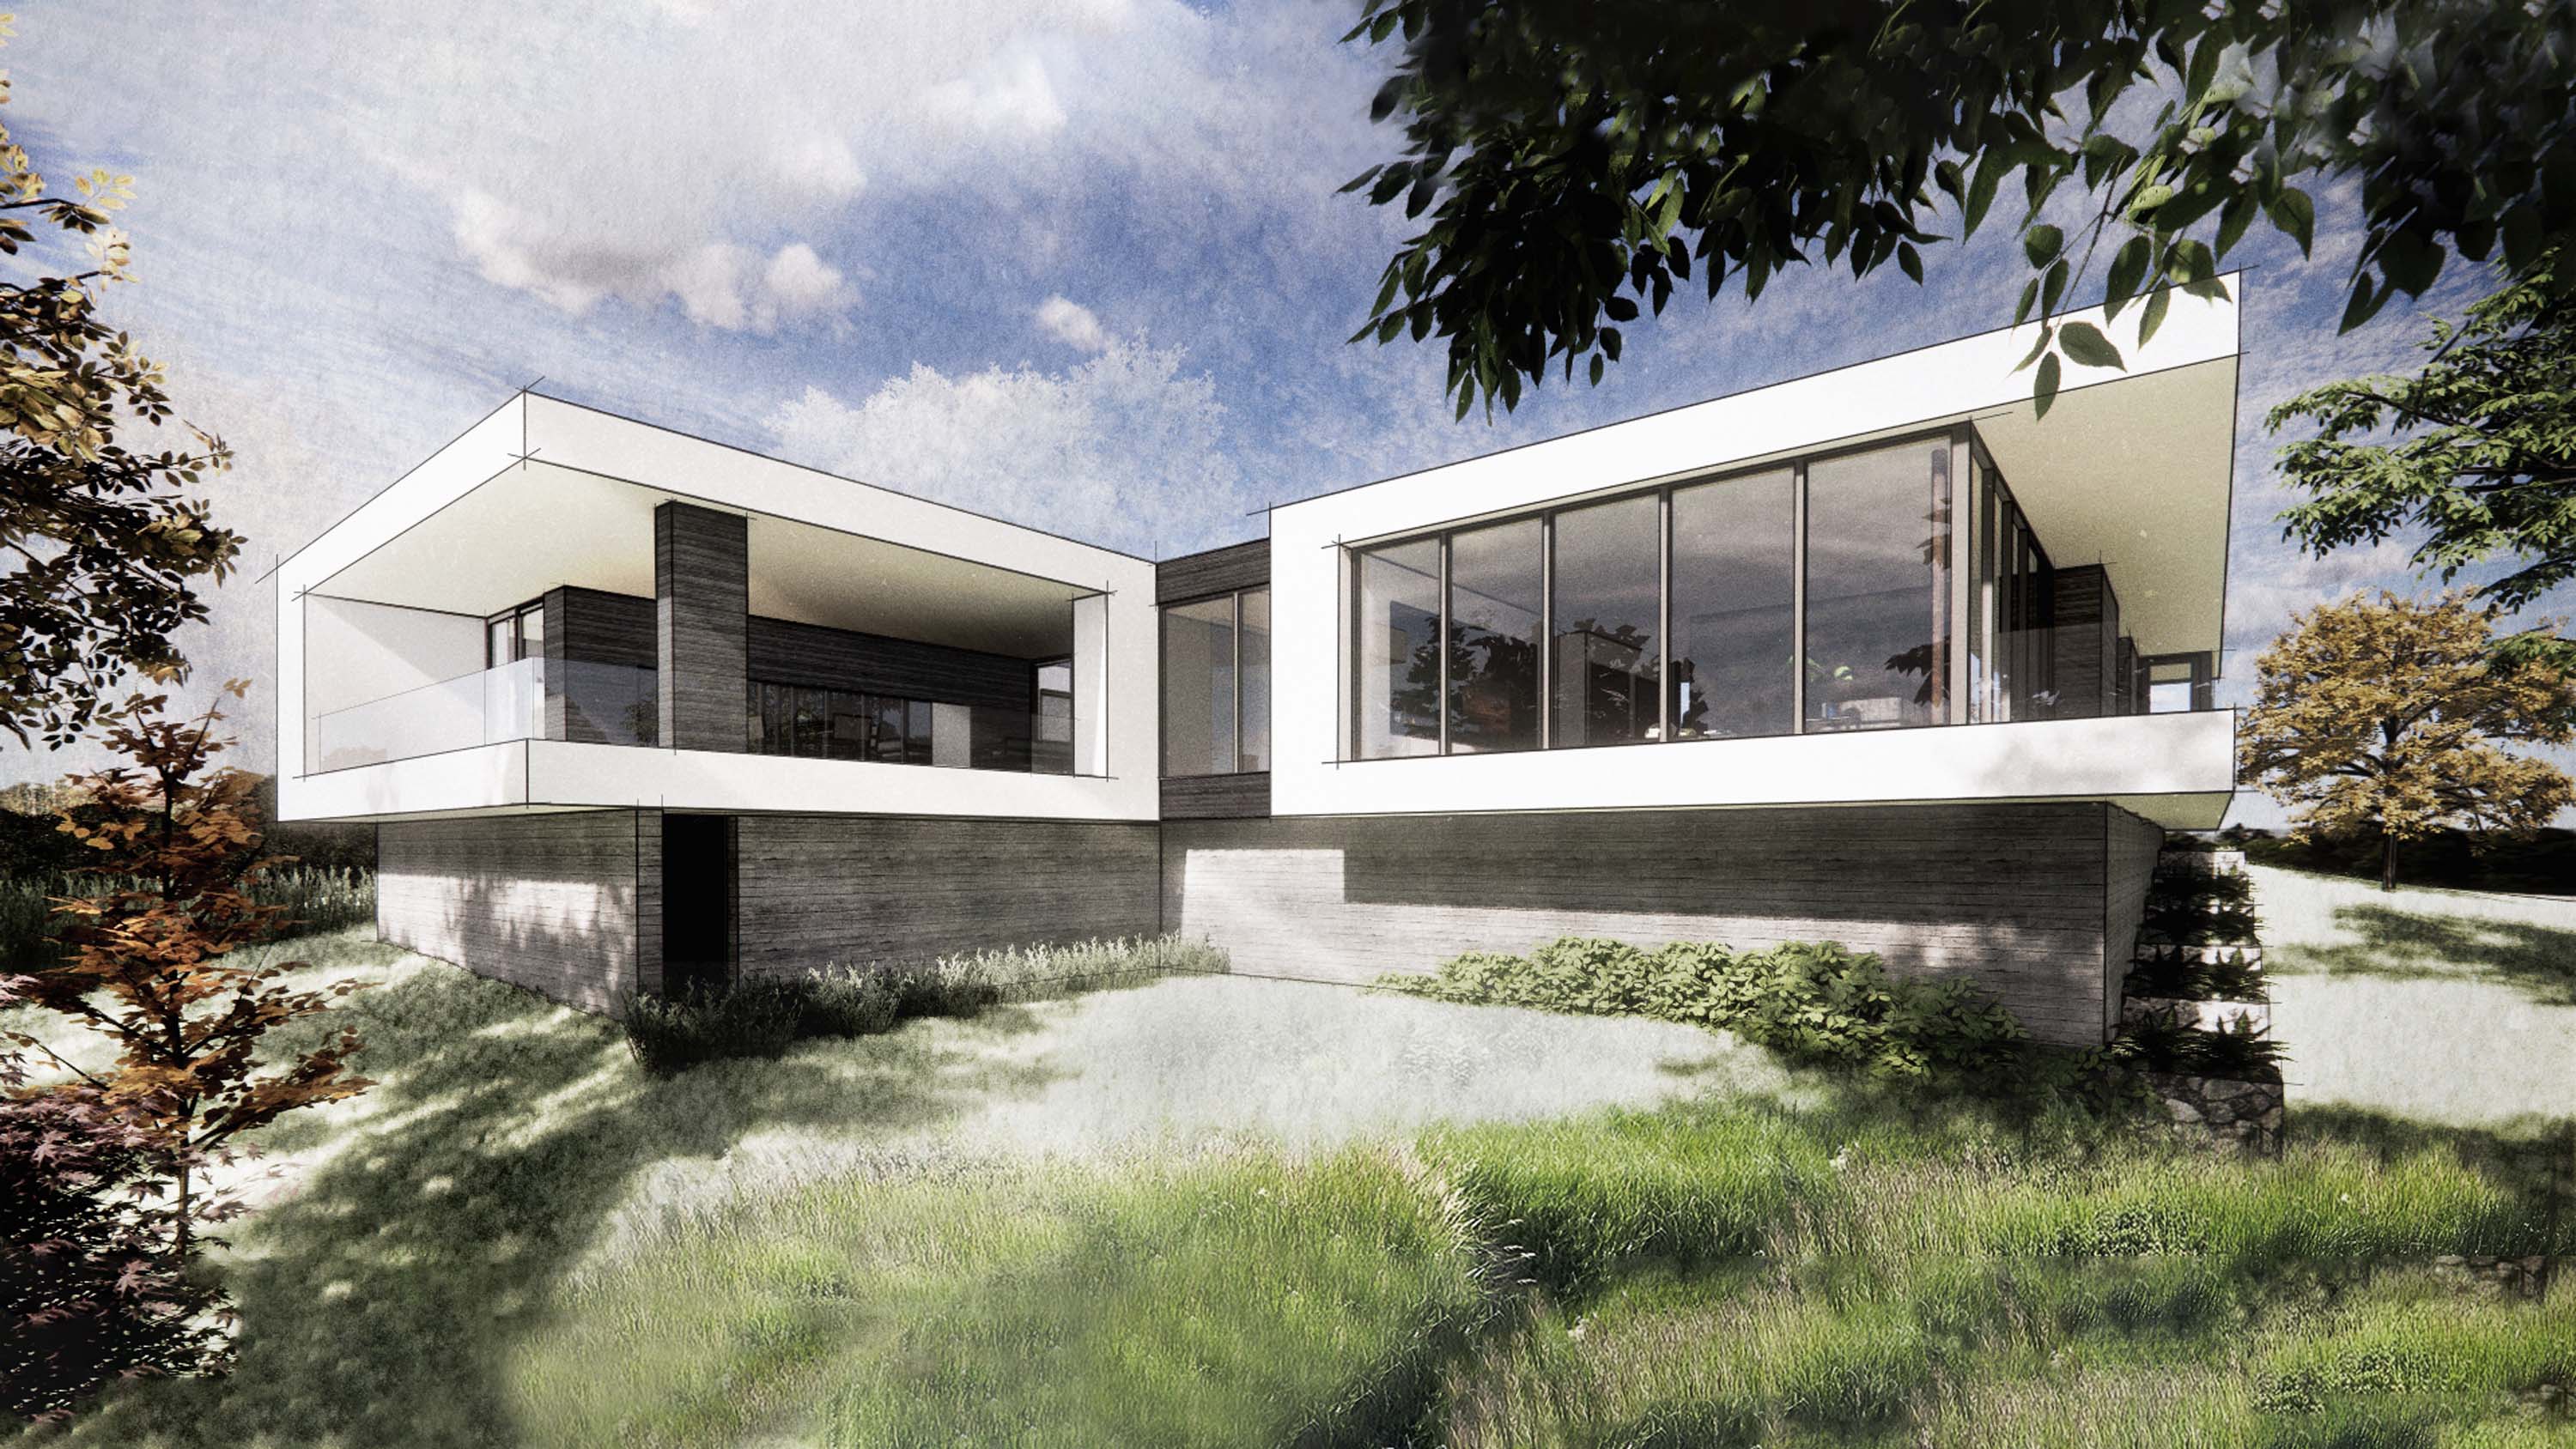 Rear exterior rendering of the Mira Vista House by Specht Novak Architects showcasing the cantilevered outdoor terrace space and abundant floor-to-ceiling windows.